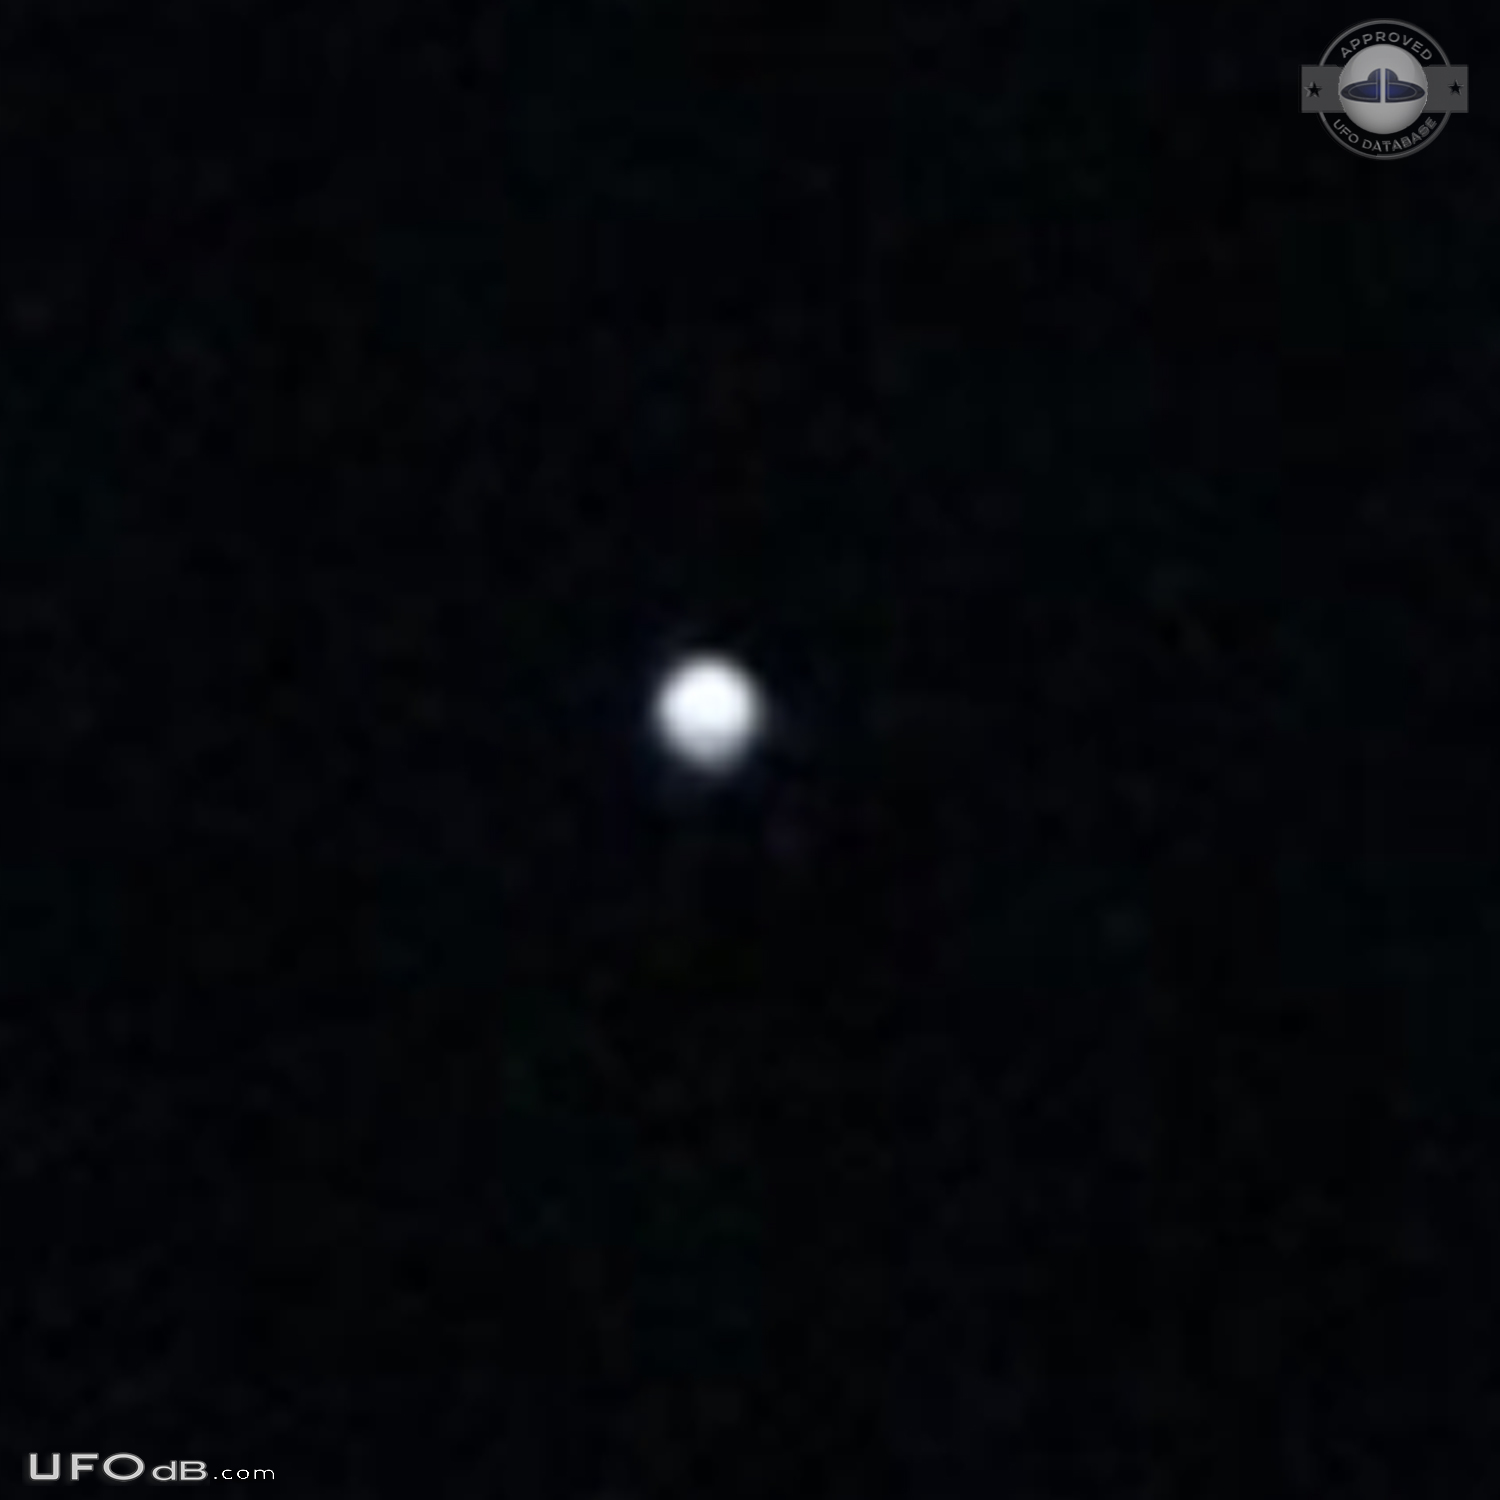 Was curious , below a star seemed there was a UFO Toronto Ontario Cana UFO Picture #784-4